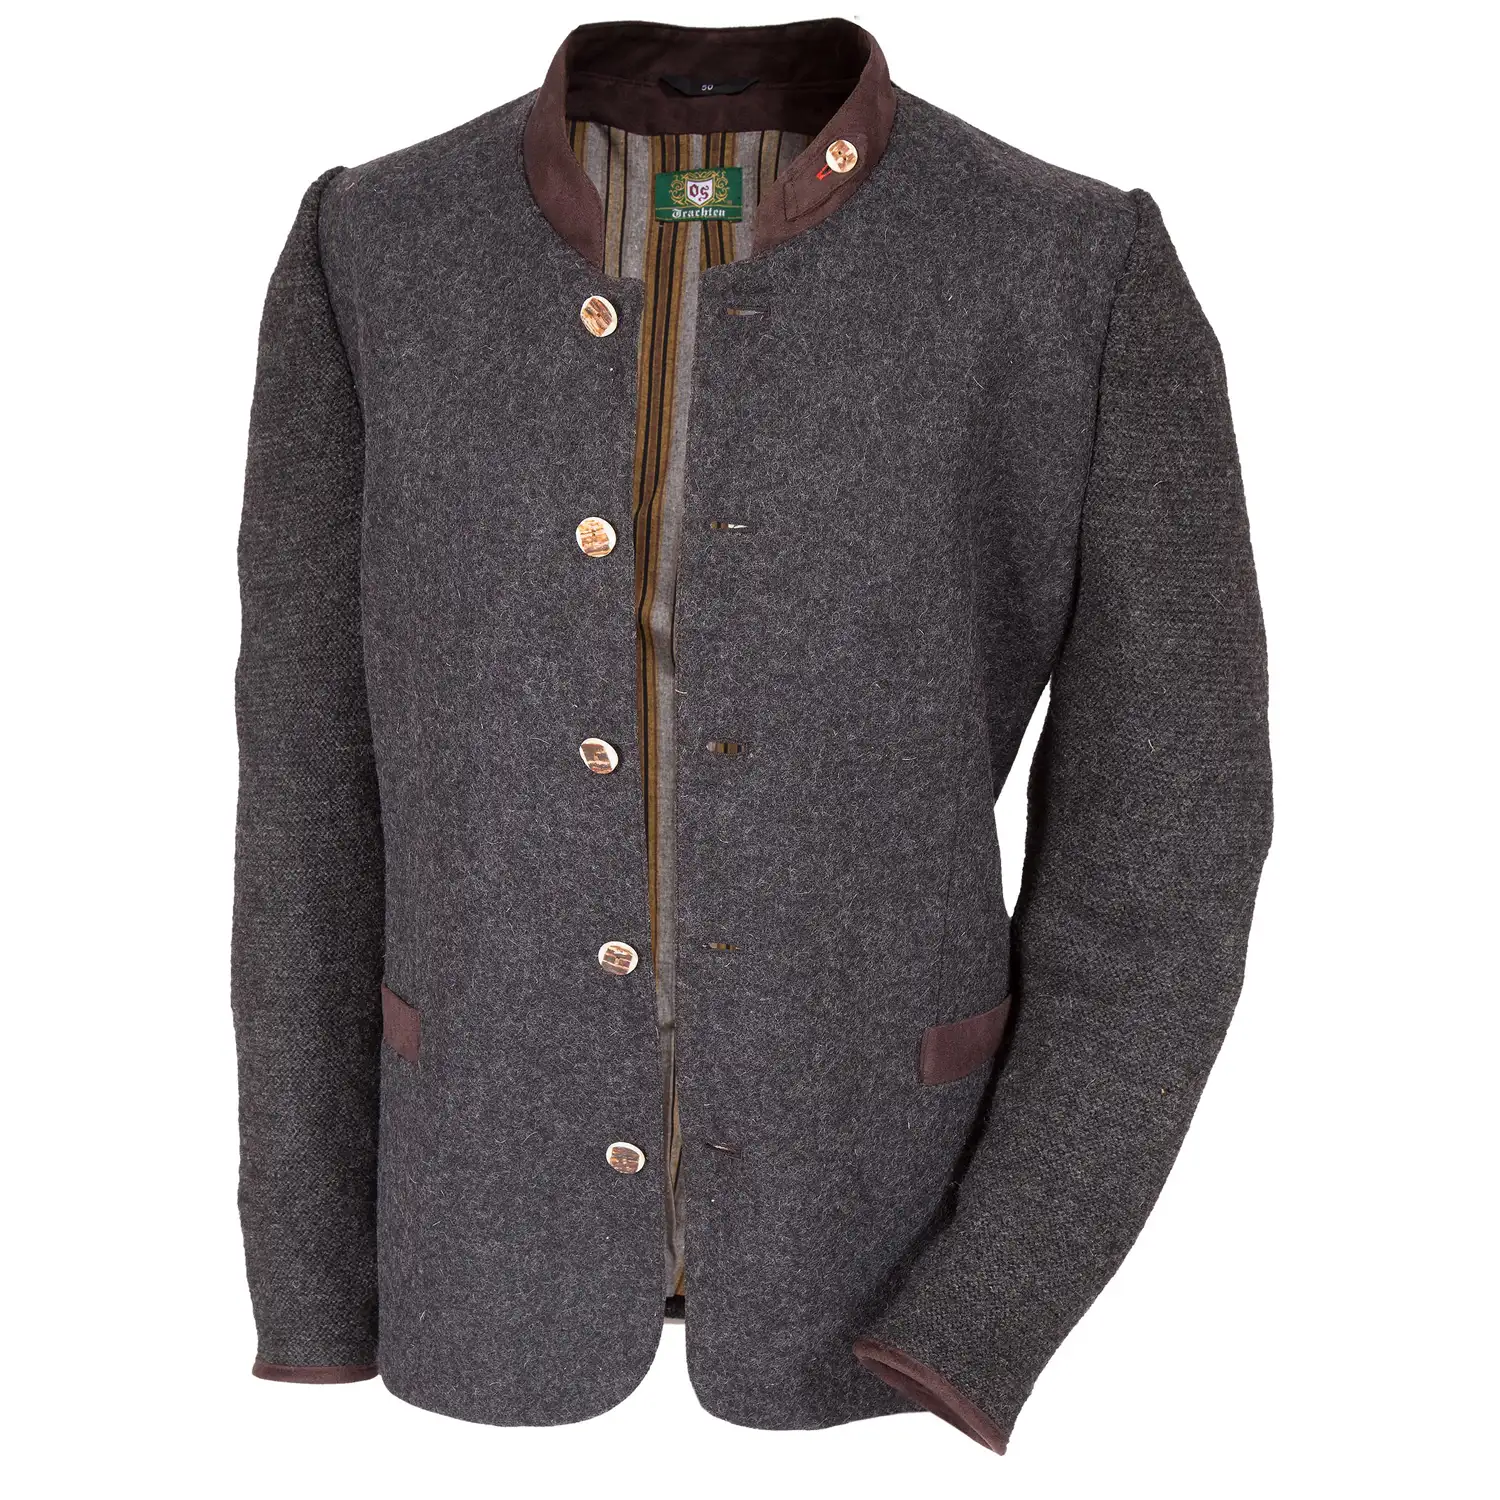 Mens traditional jacket made of loden in anthracite